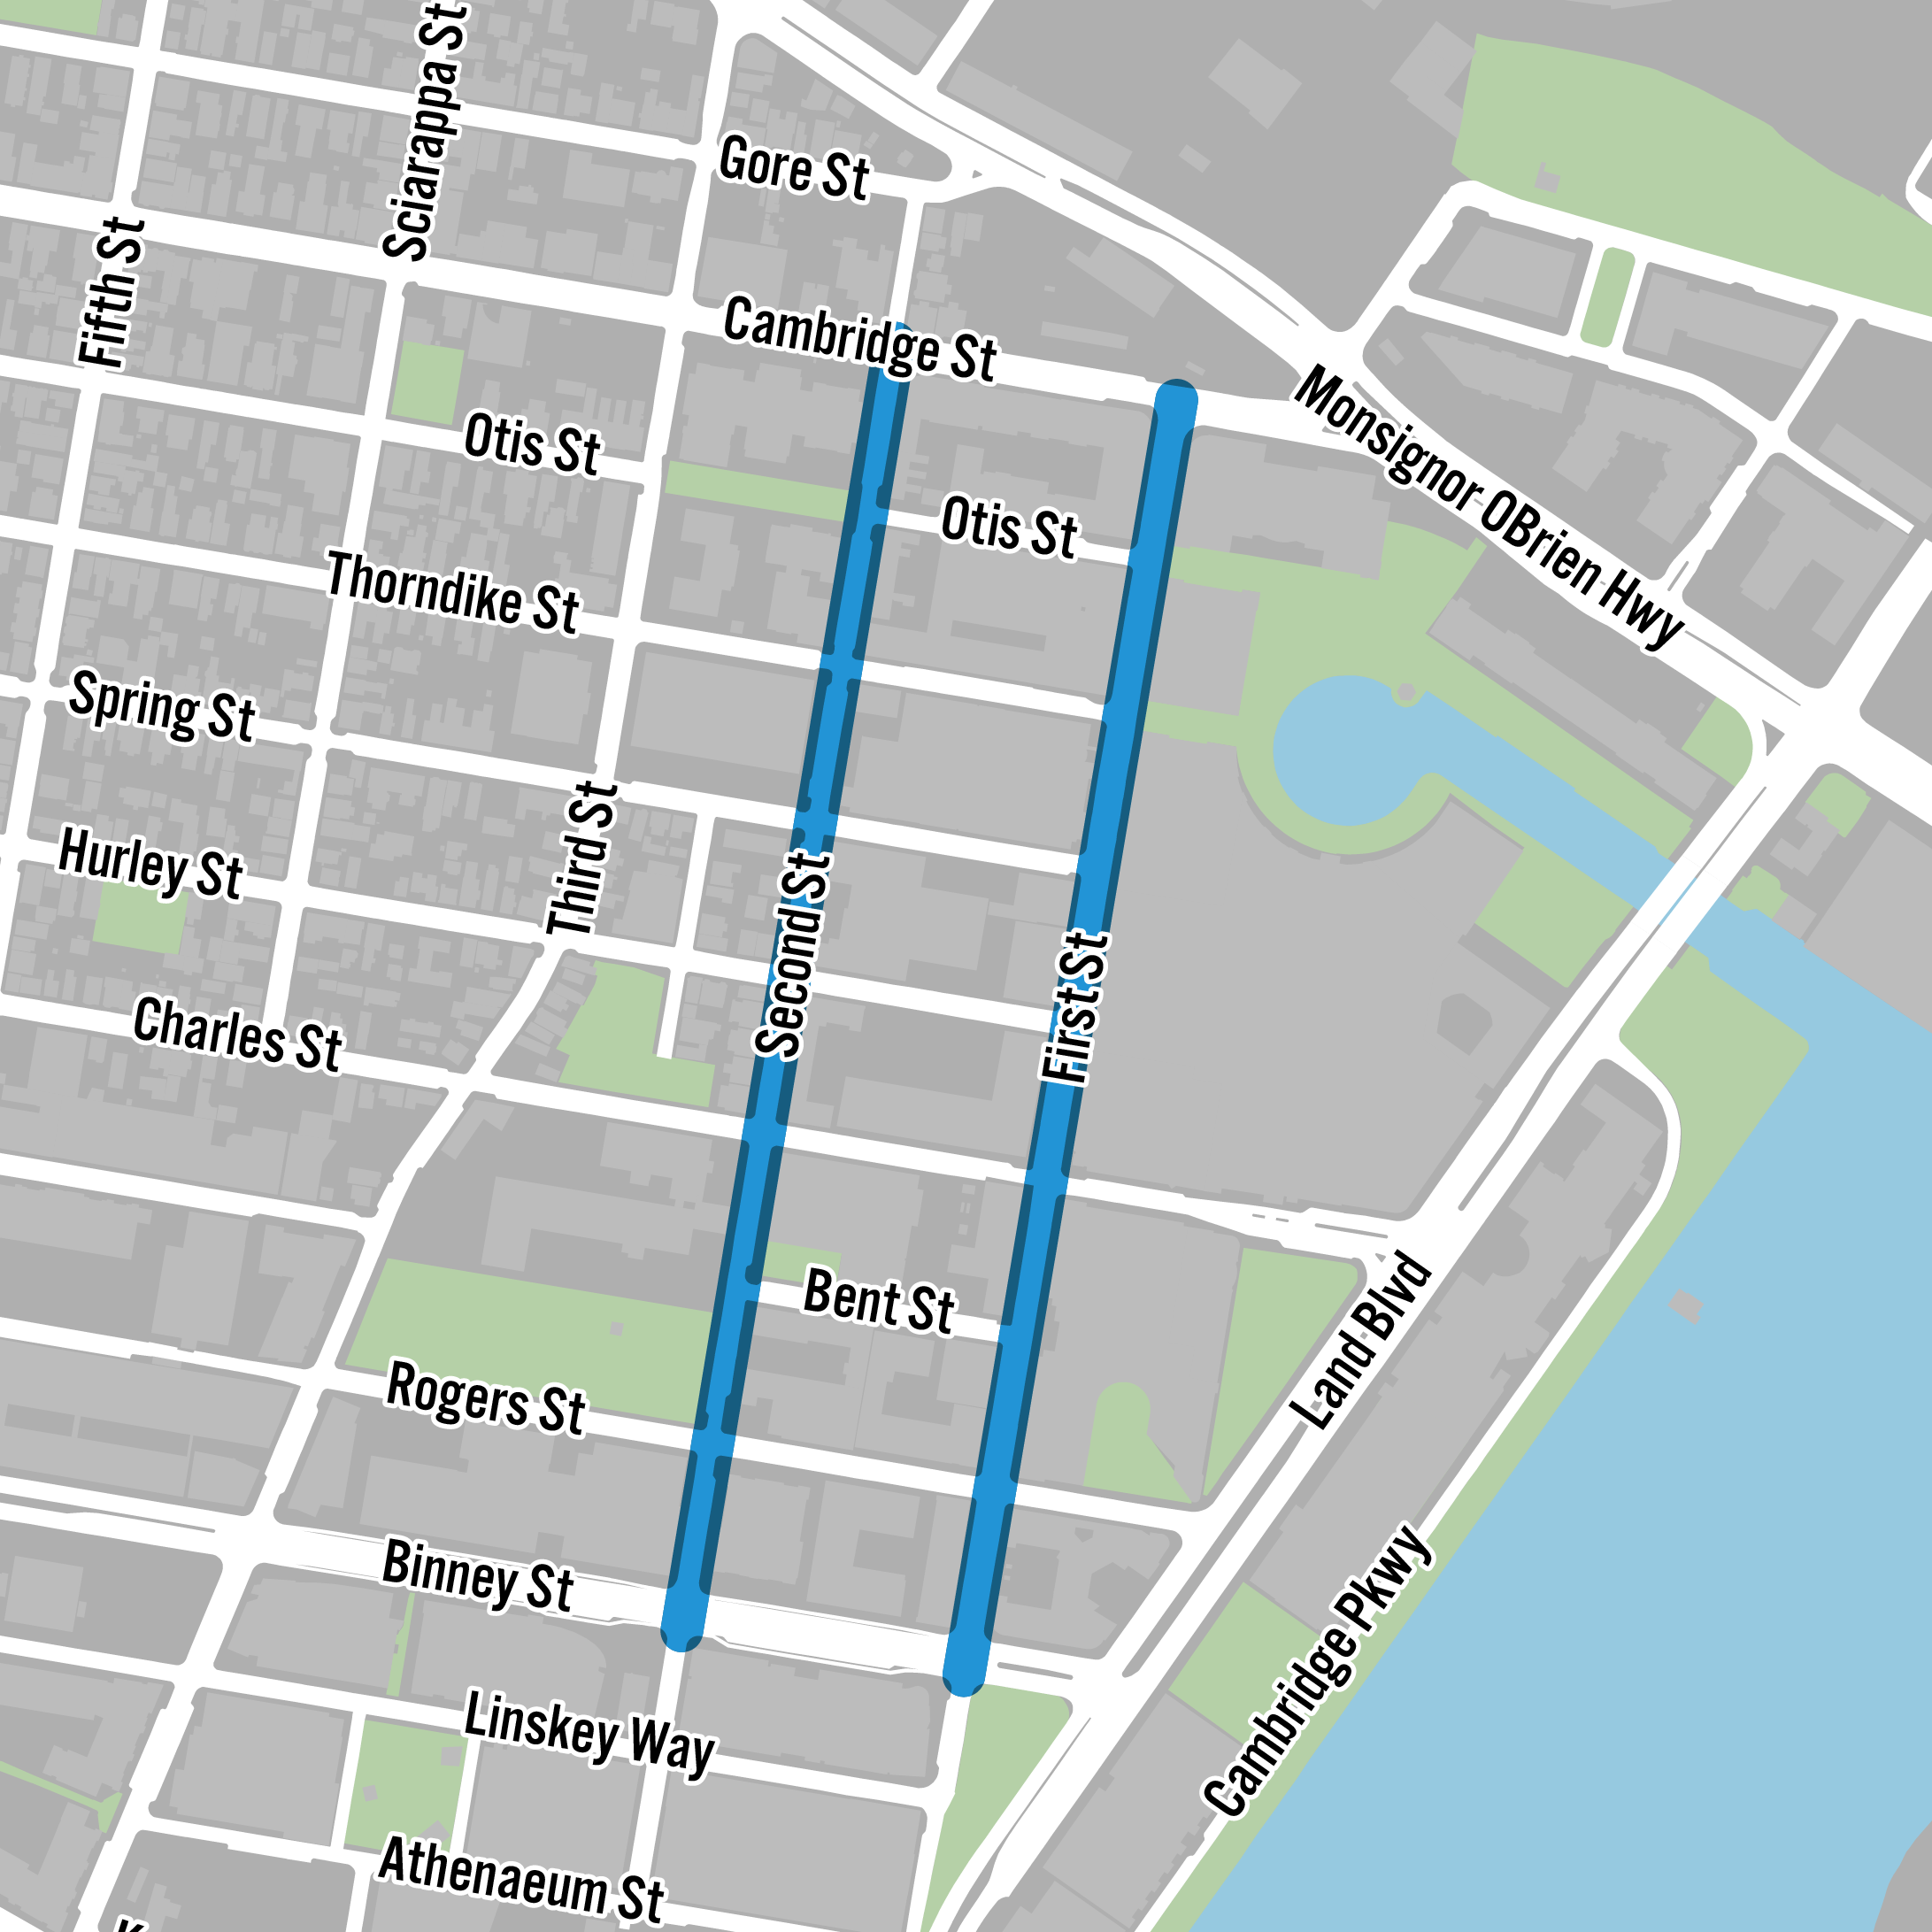 A map of the area around the First Street corridor with First Street and Second Street between Cambridge Street and Binney Street highlighted.